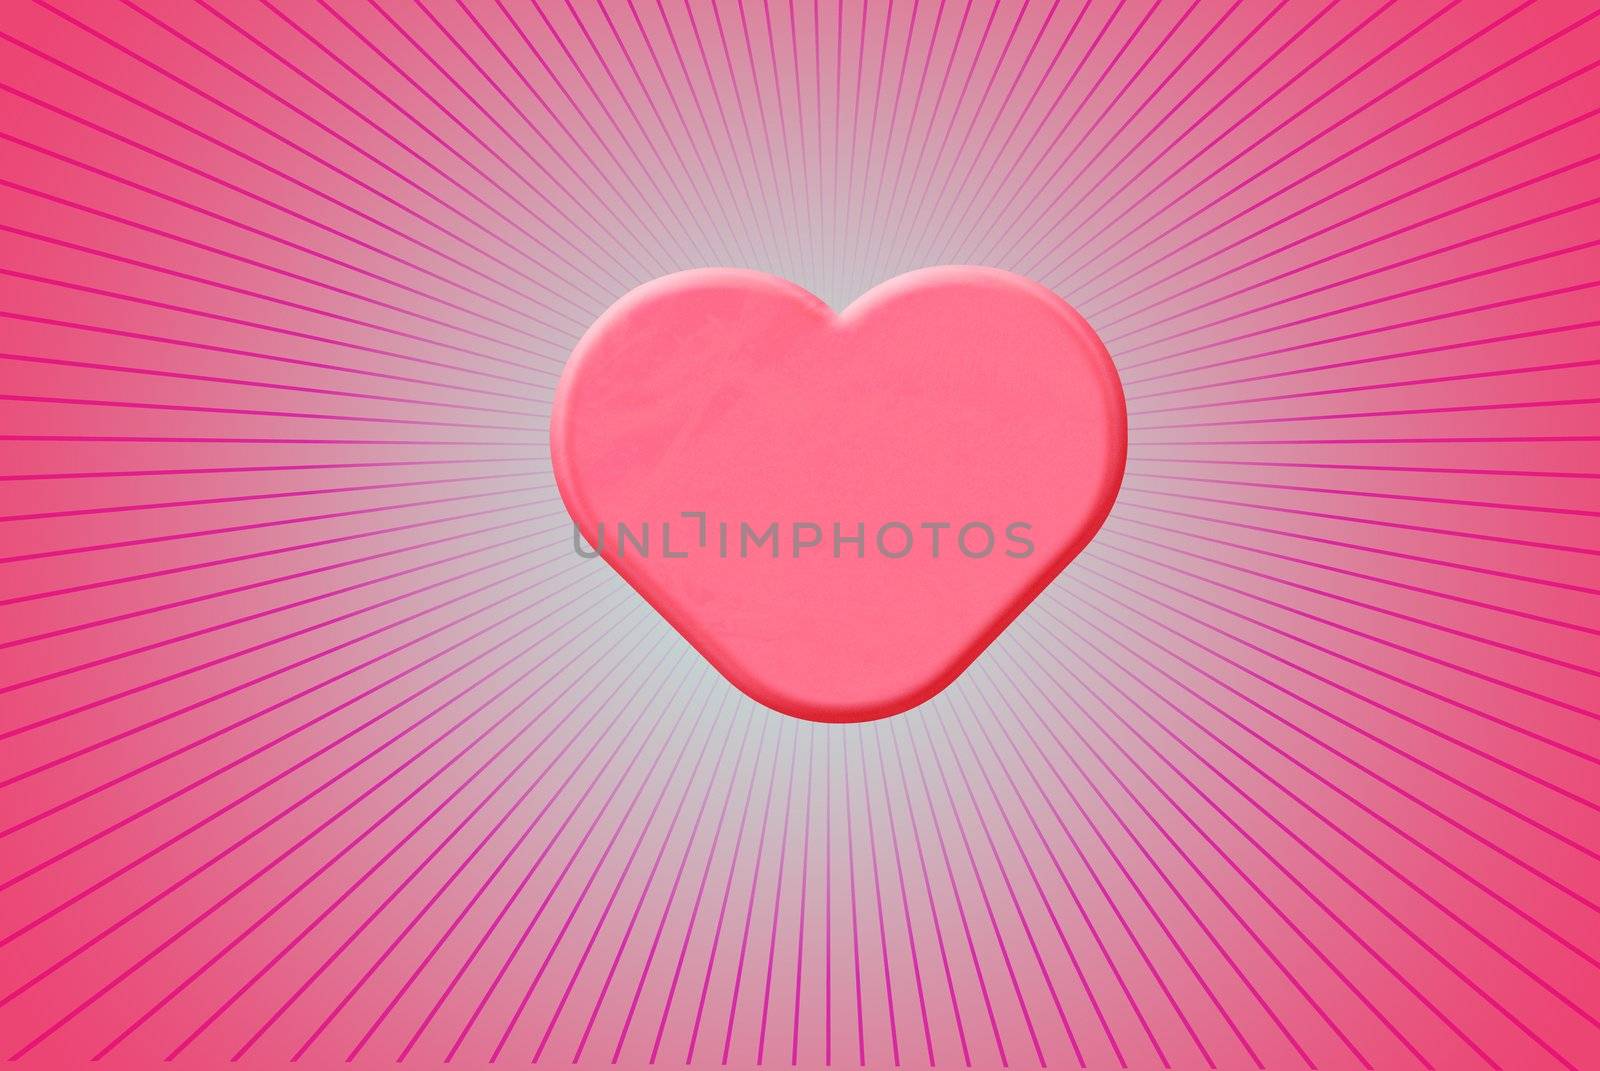 Sweet looking pink heart with line background, can be use for various love related concepts, design and print out.